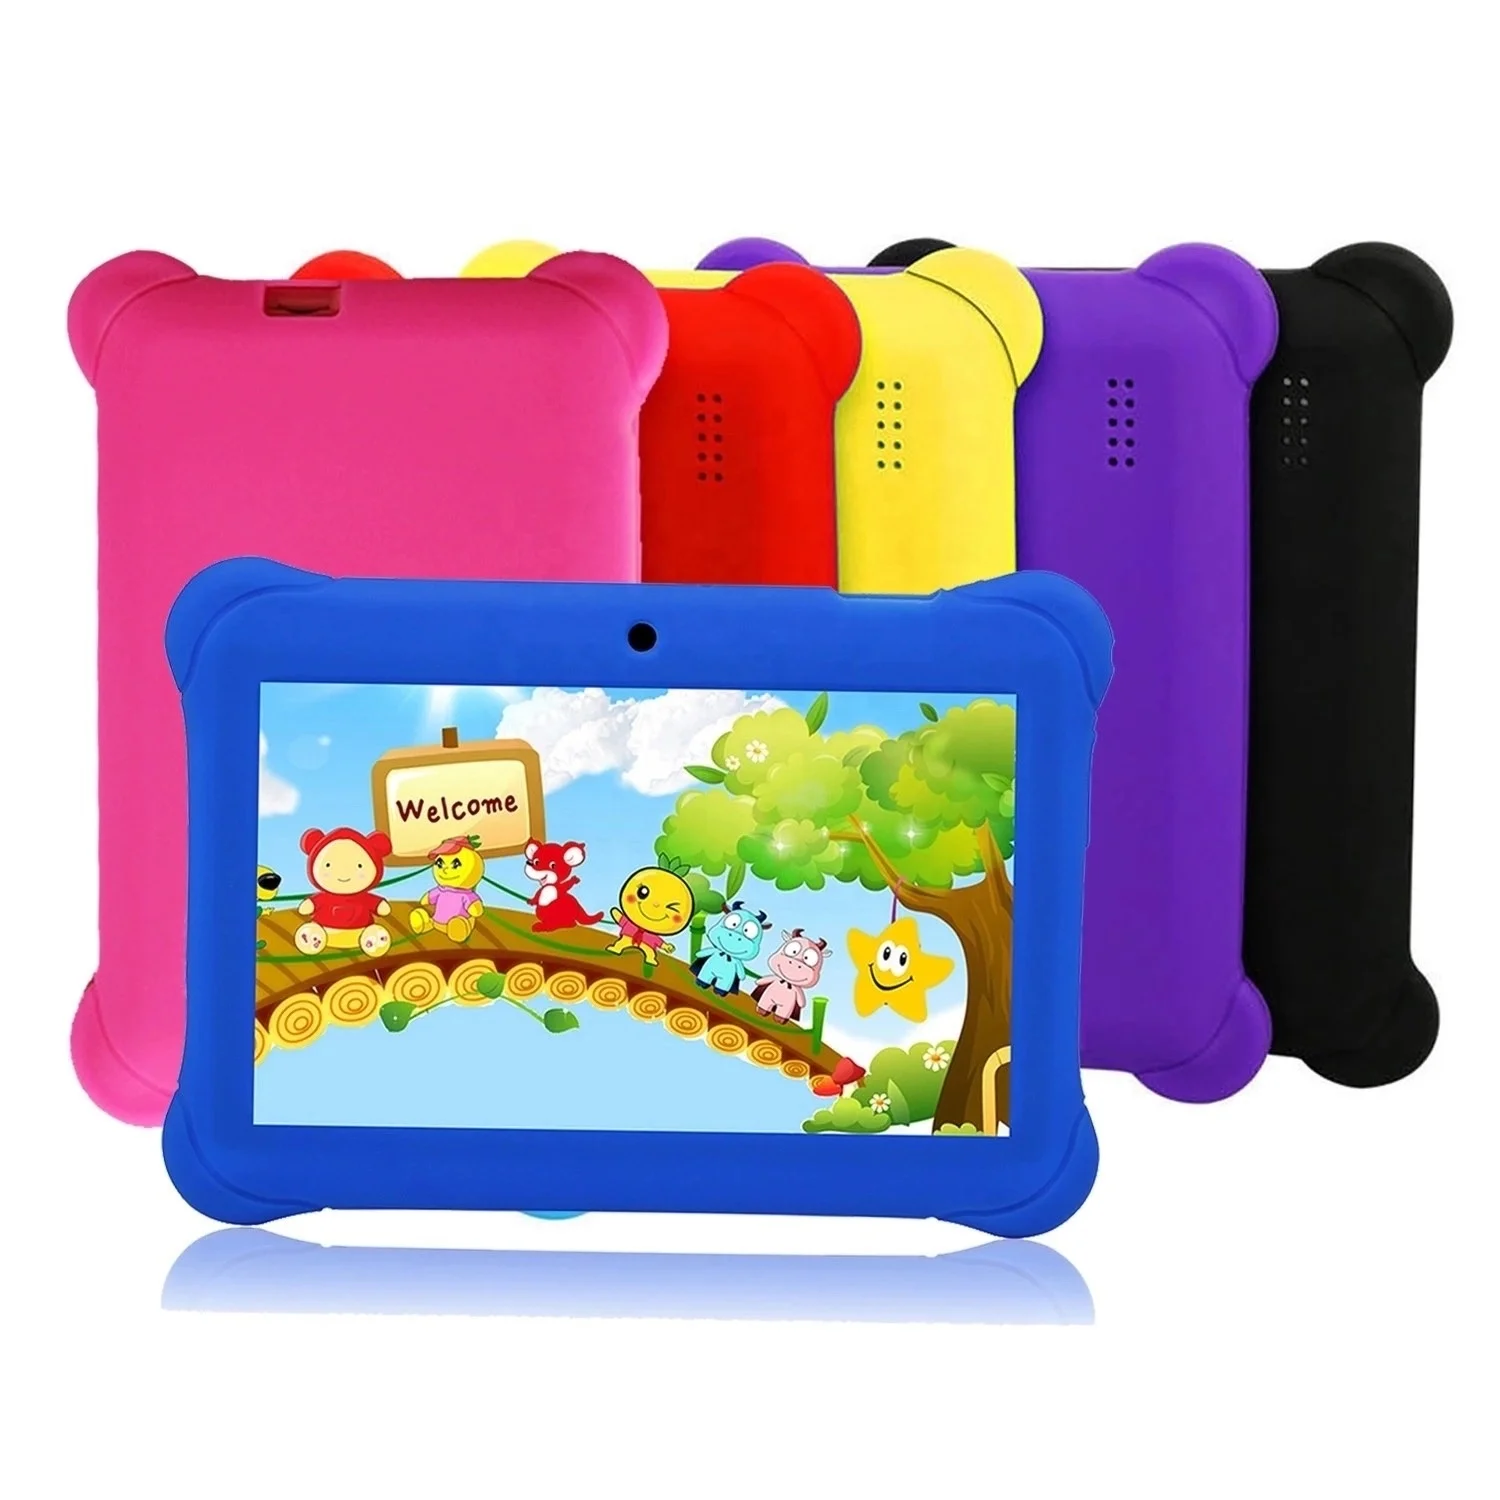 

Wintouch A33 Kids Tablet New Model 7 inch Android Quad Core Game Study Tablet With Dual Camera WIFI Mini Q88 Tablet For Kids